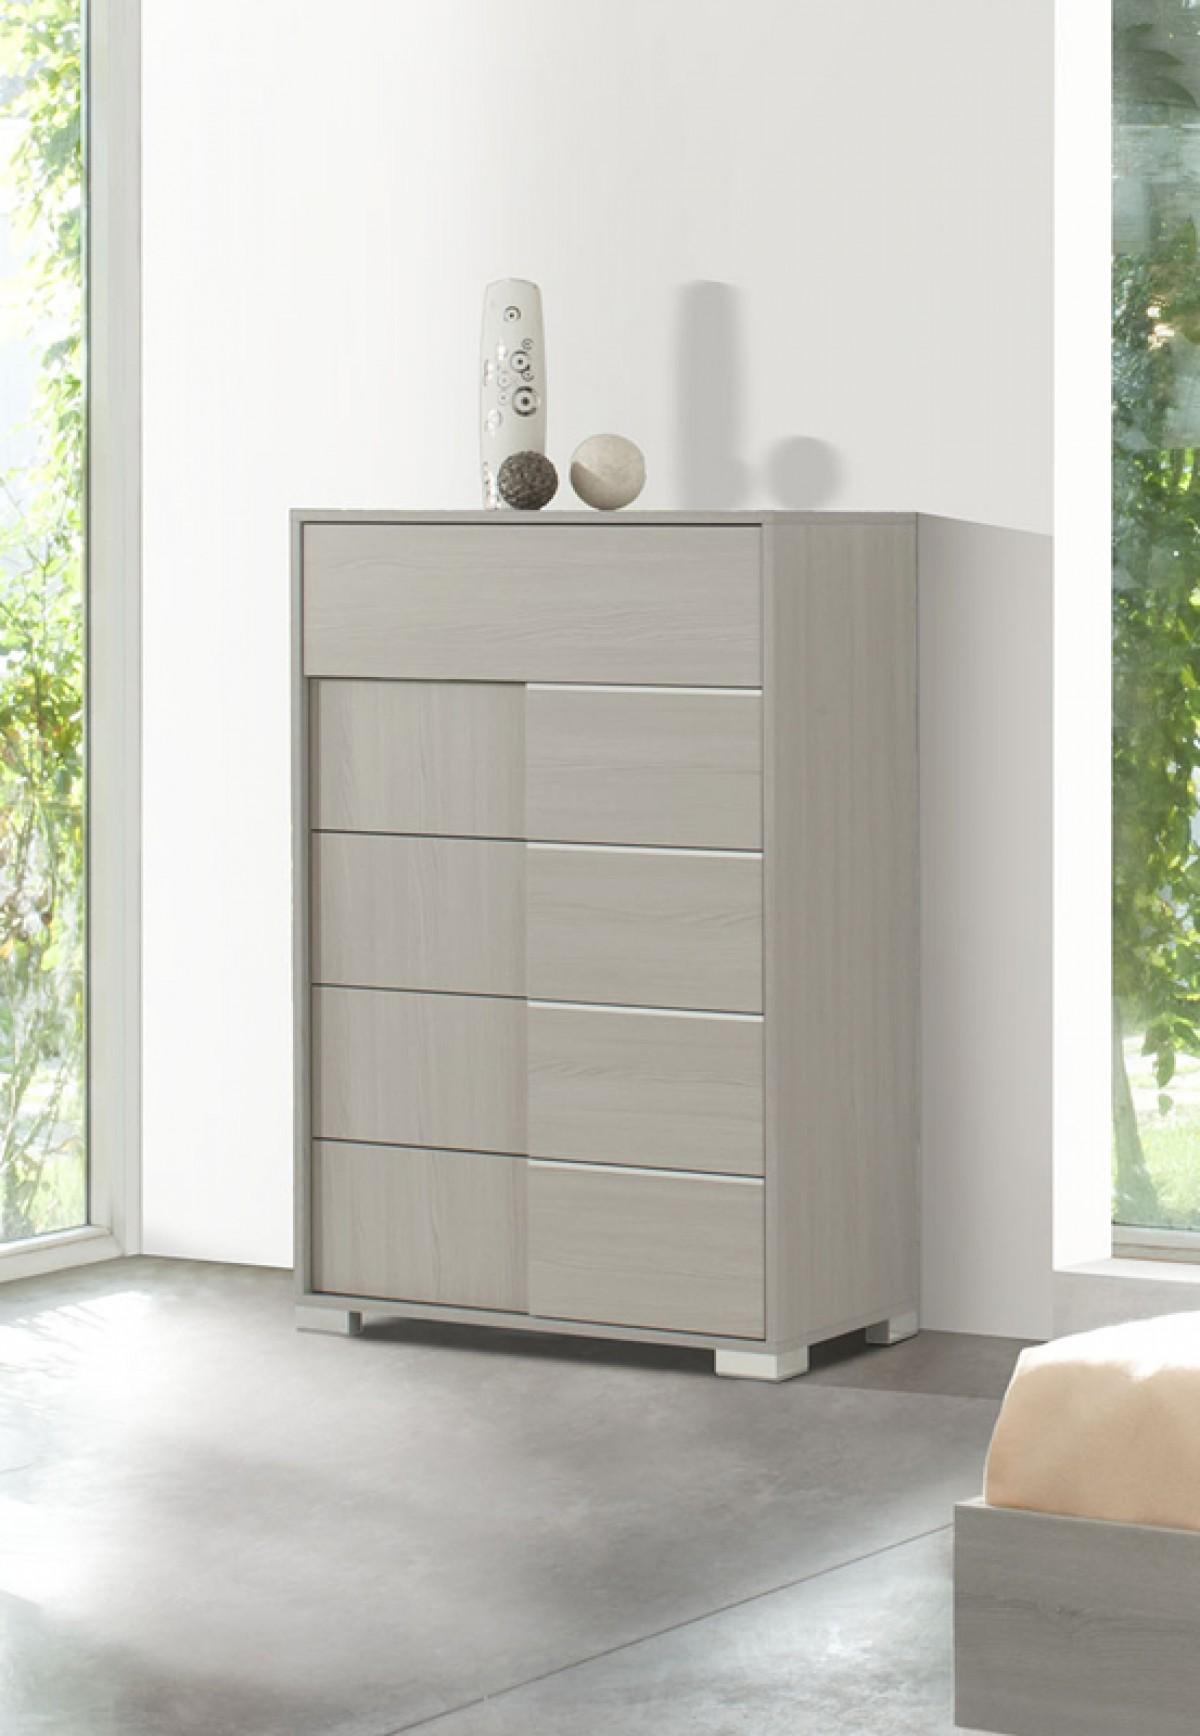 Contemporary, Modern Bachelor Chest Modrest Ethan VGACETHAN-CHEST in Gray Lacquer